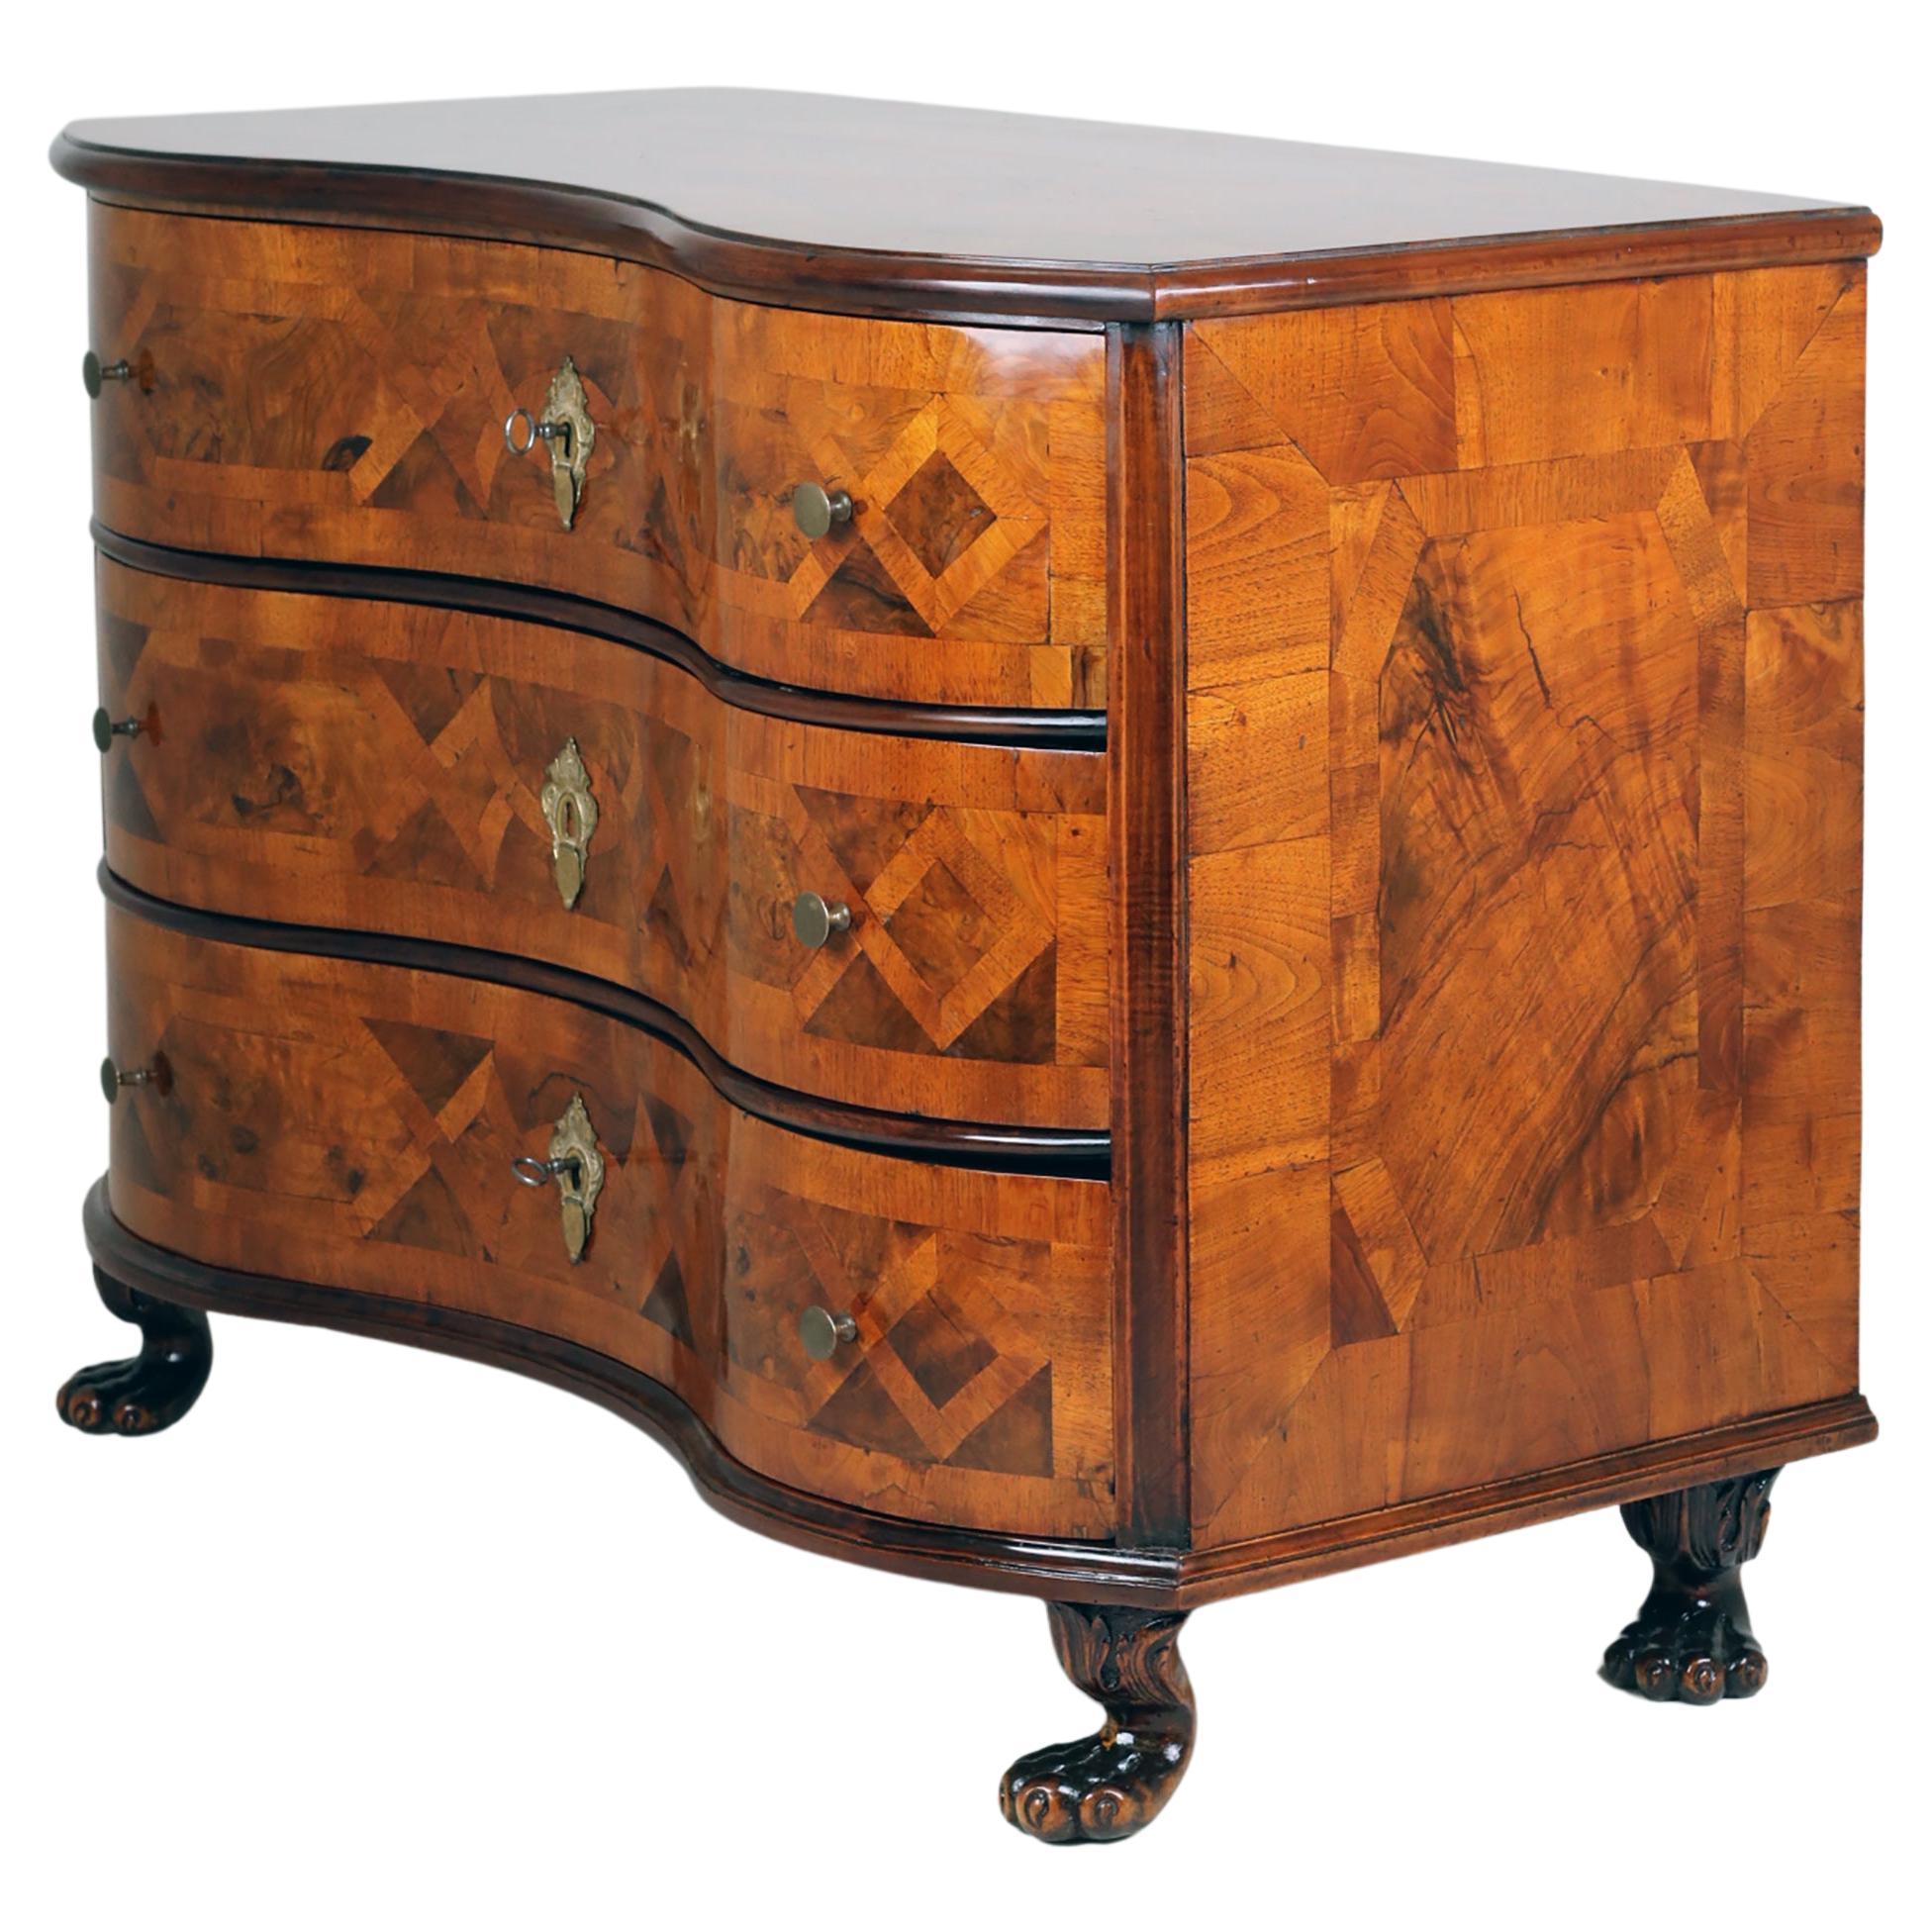 18th Century Baroque Chest of drawers
\
Masterful small baroque chest of drawers in walnut and walnut root veneer inlaid with a large diamond pattern, very beautiful body with paw feet, 3 bellied drawers, upper drawer with brass double tongue lock,